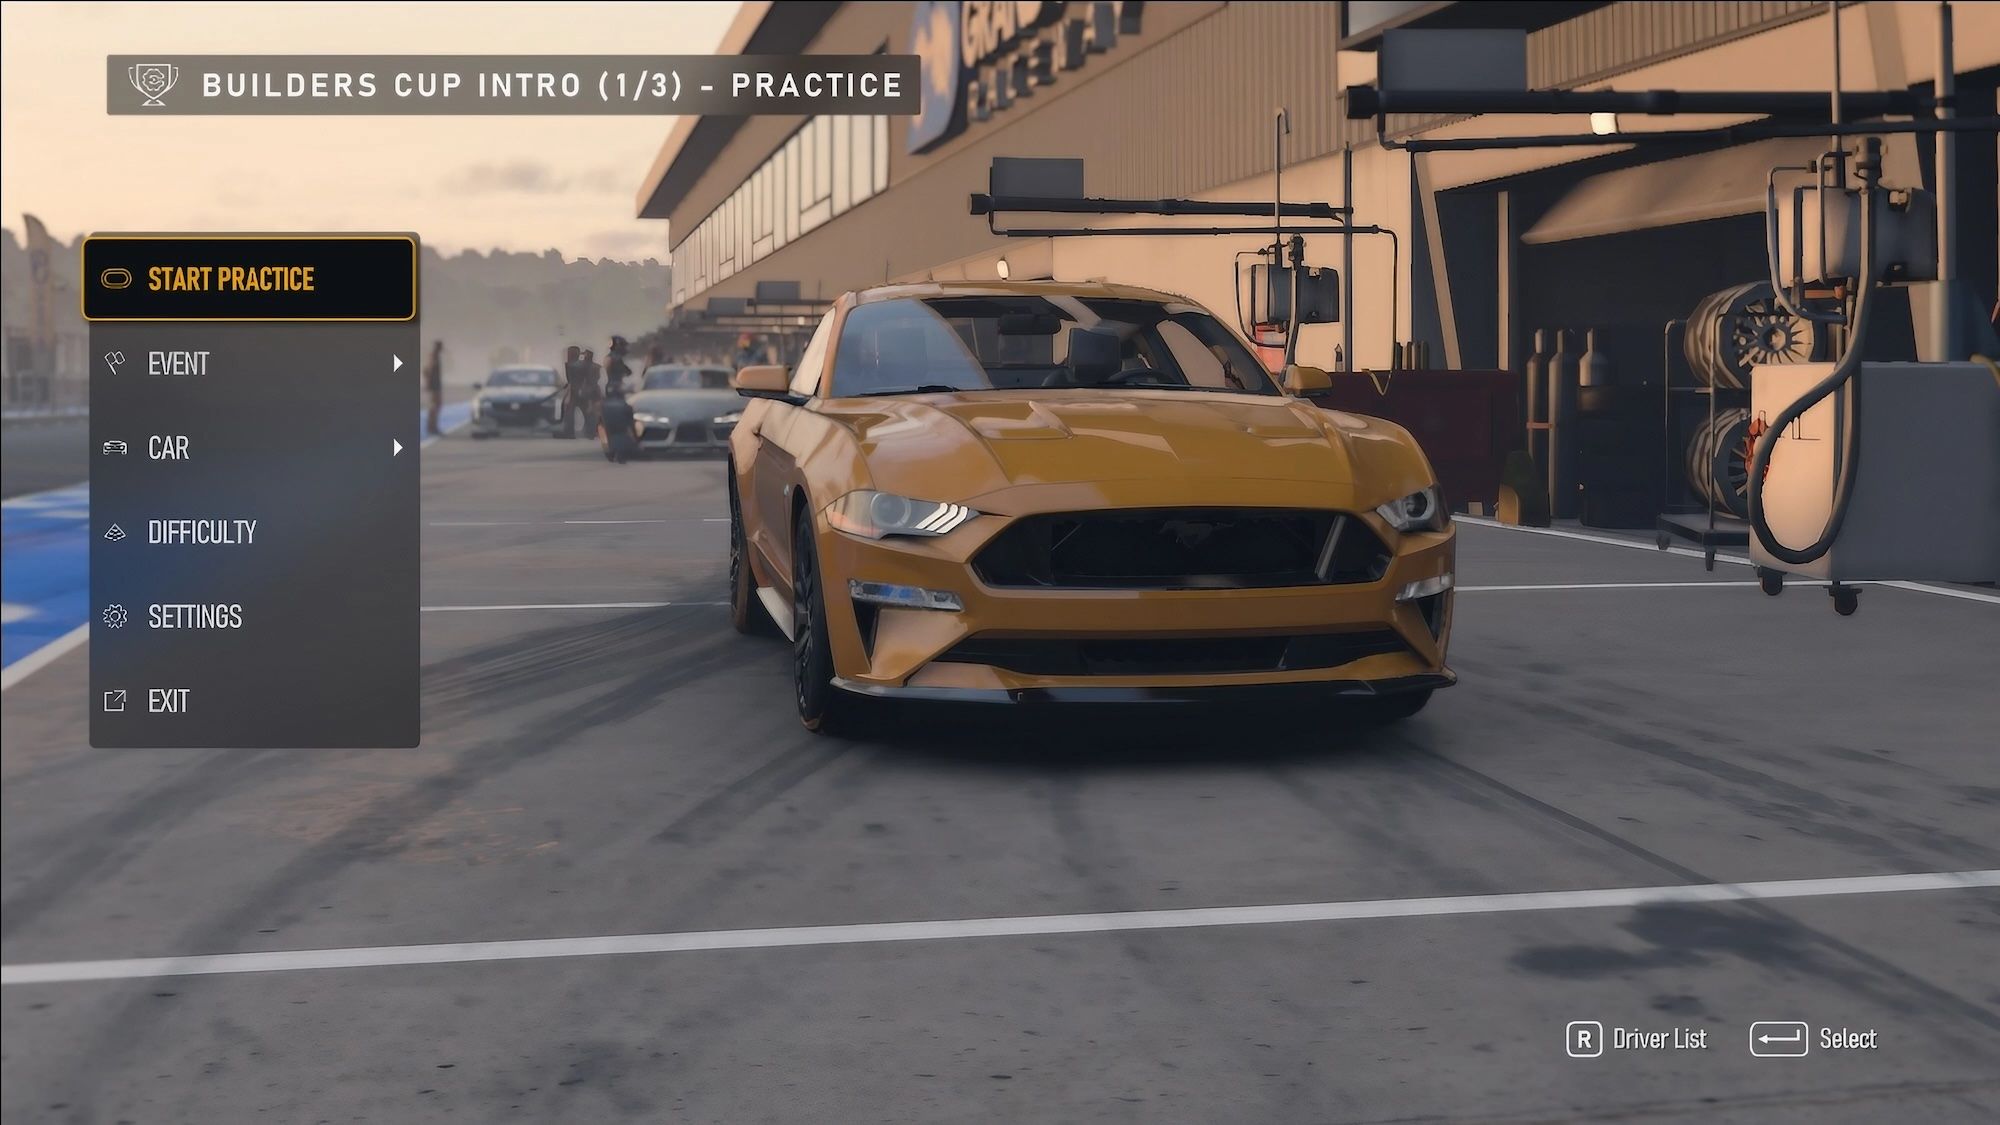 Ford Mustang's practice session screen in Forza Motorsport